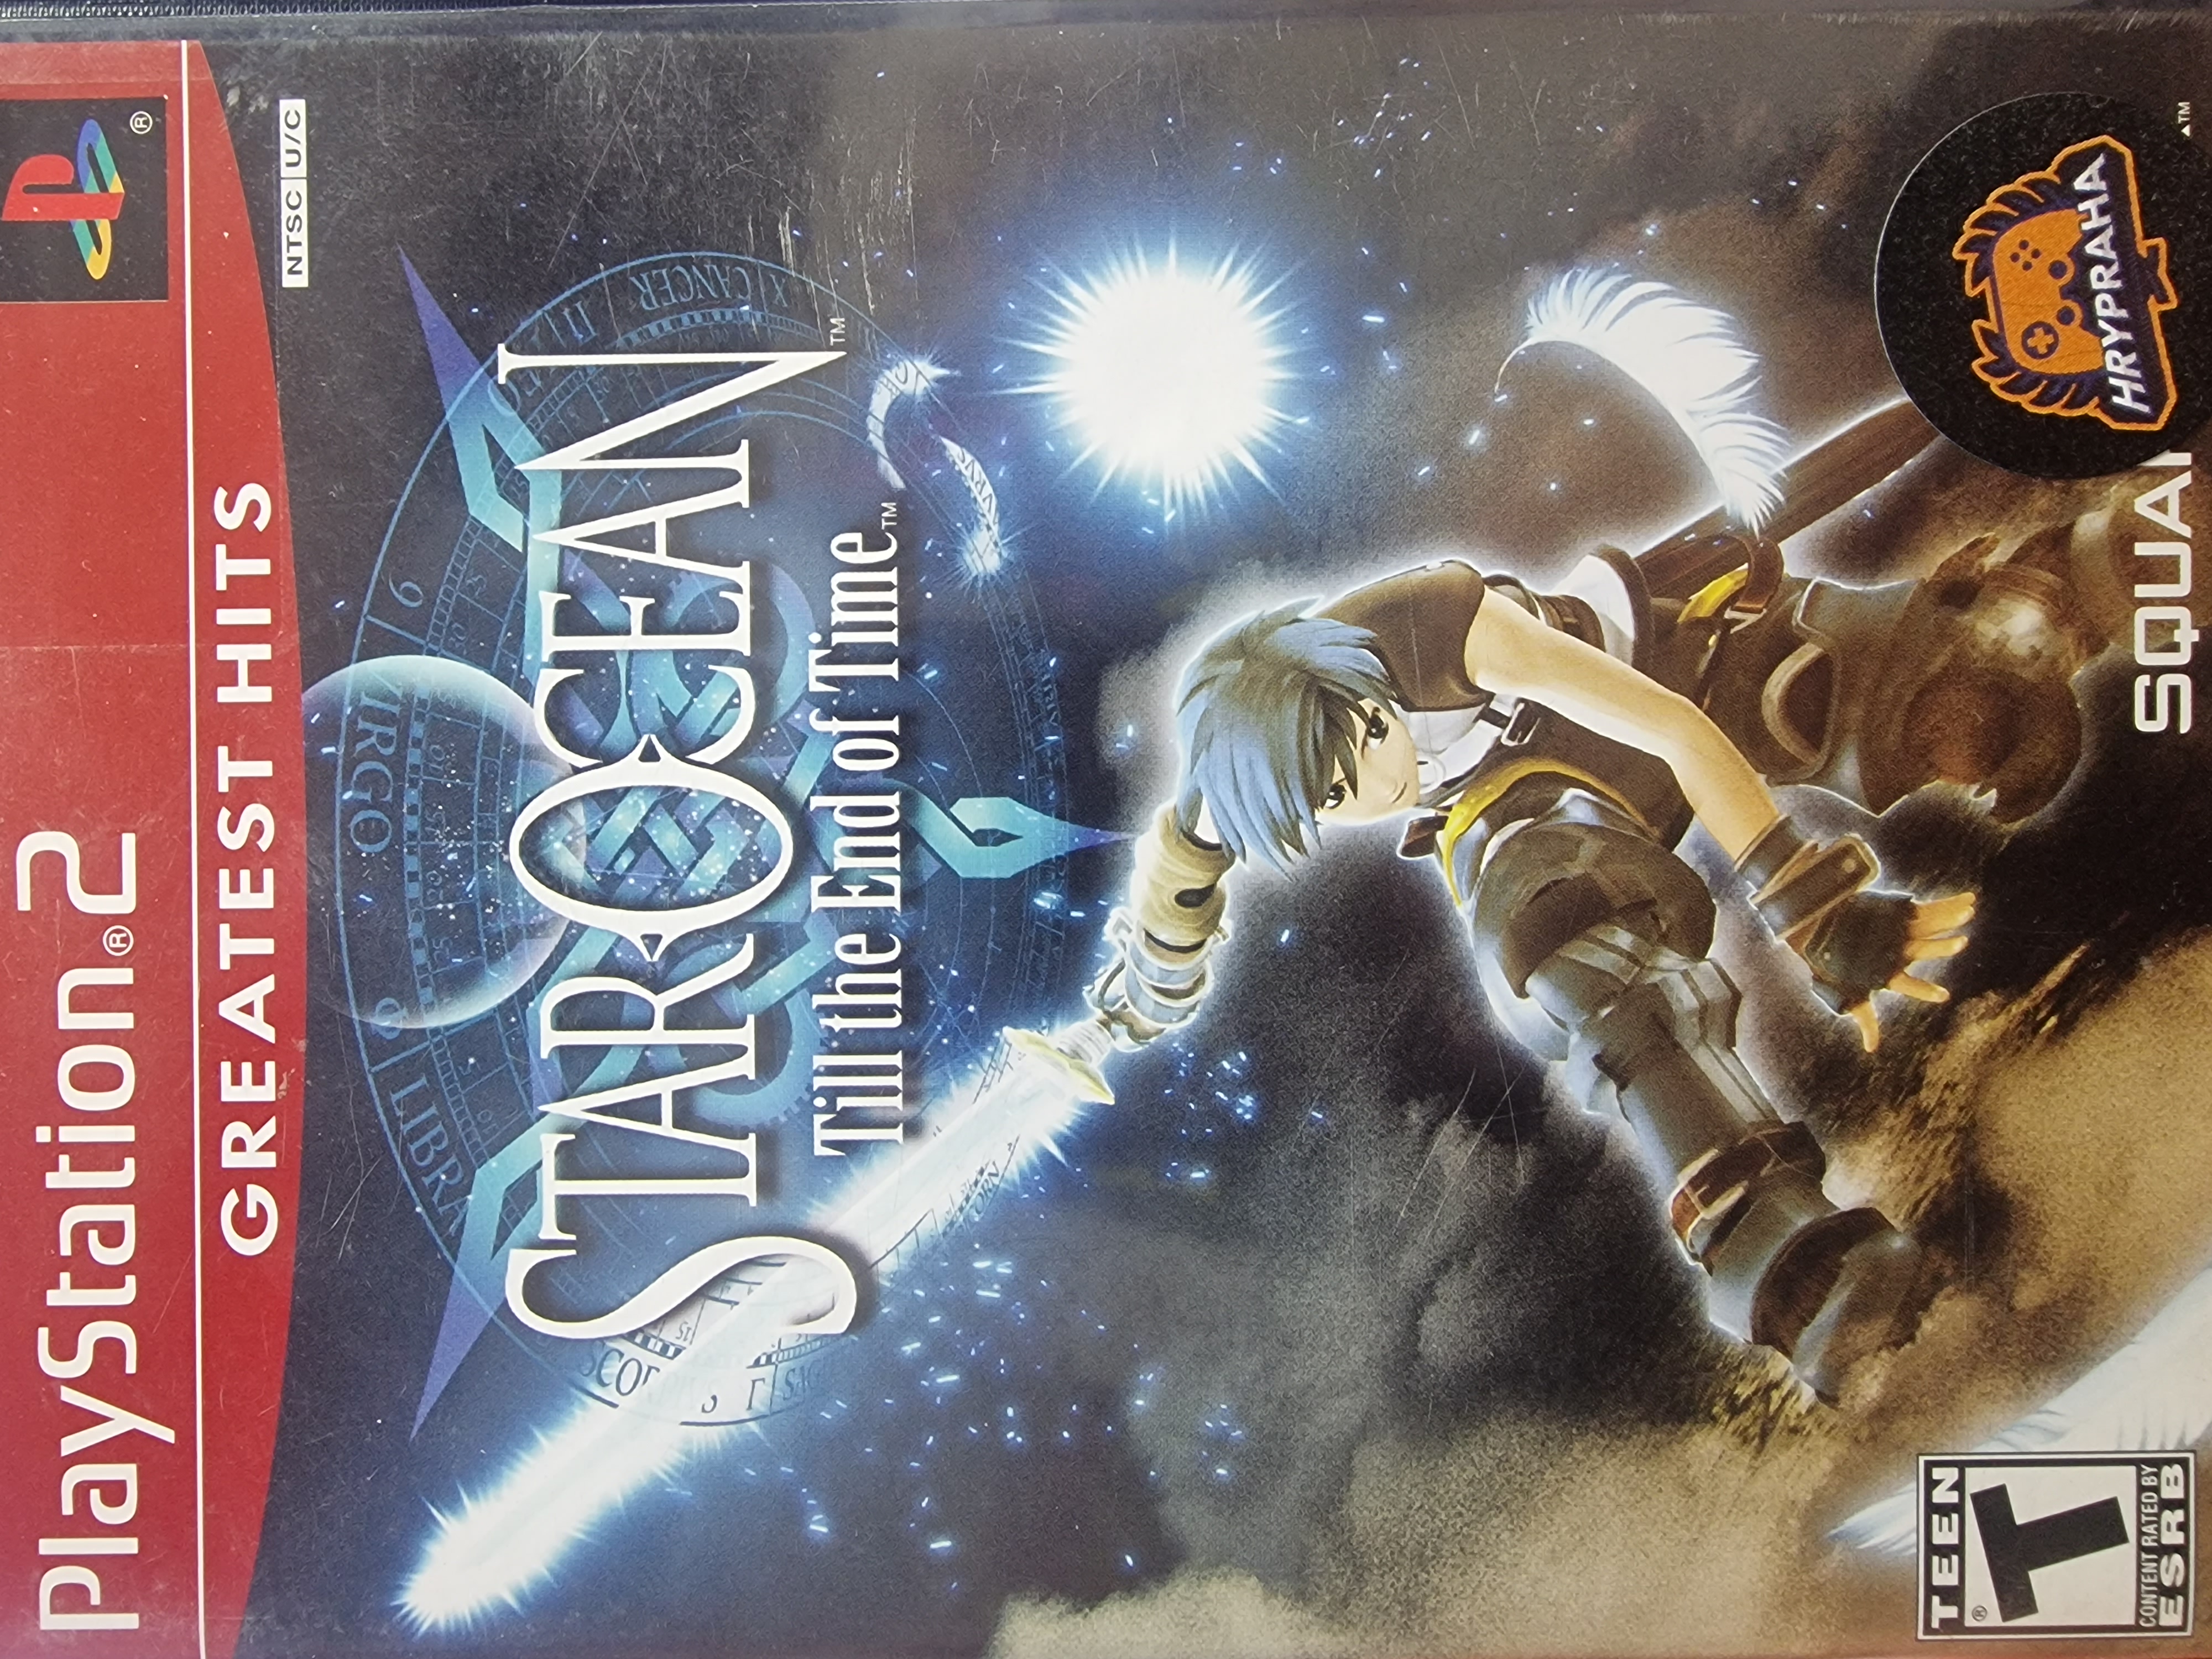 Starocean till the end of time  Ps2 